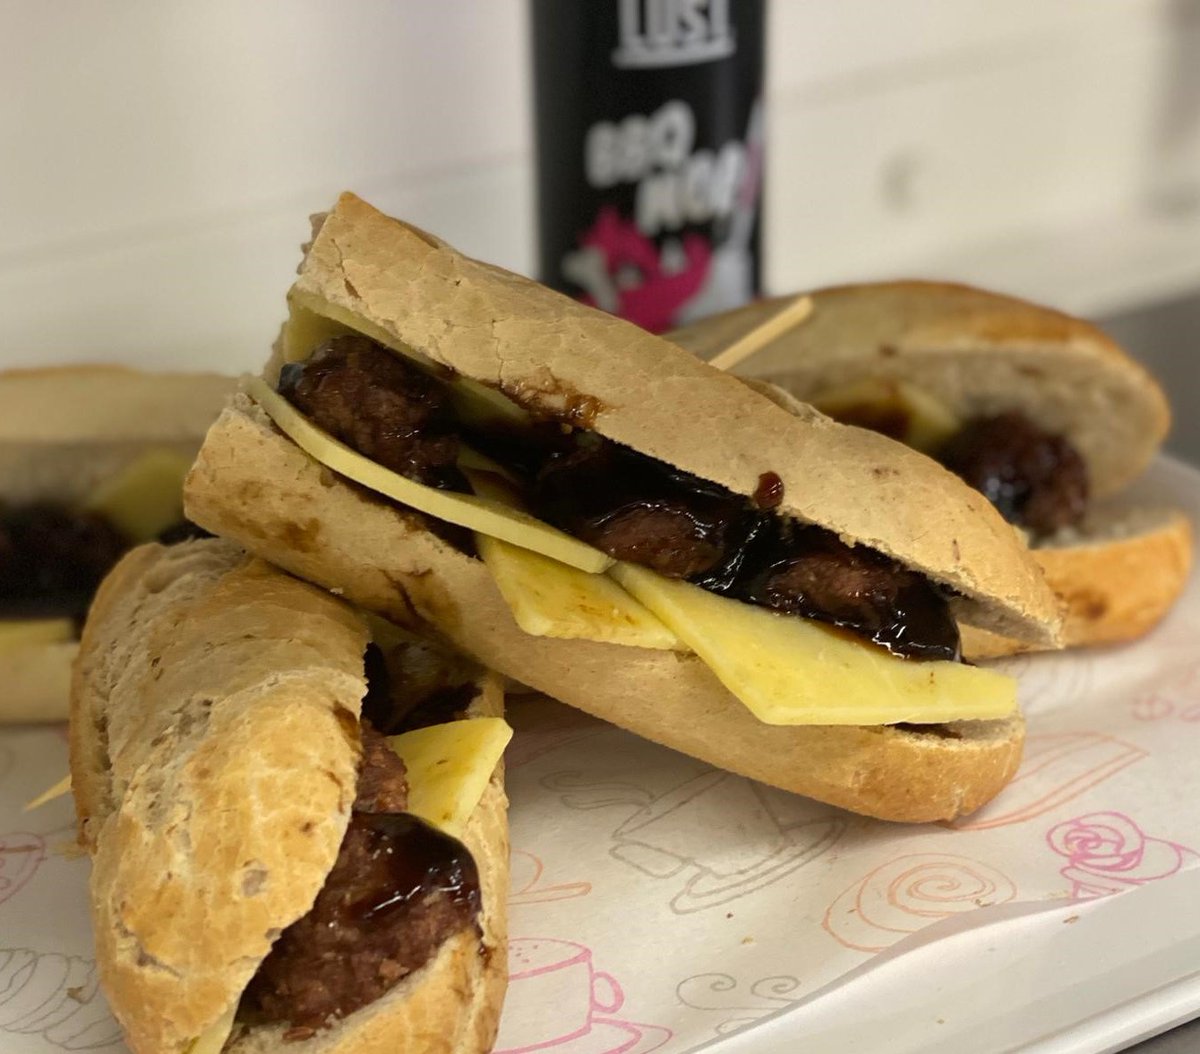 Introducing our latest addition to our Café menu; Gavin's Special BBQ Meat Balls! Served in a crusty baguette with cheese & lashing of BBQ mop sauce. 🤤🥖 #bbqmeatballs #bbqmopsauce #meatballbaguette #meatballs #handmademeatballs #cafe #butchery #rovesfarm #swindon #wiltshire